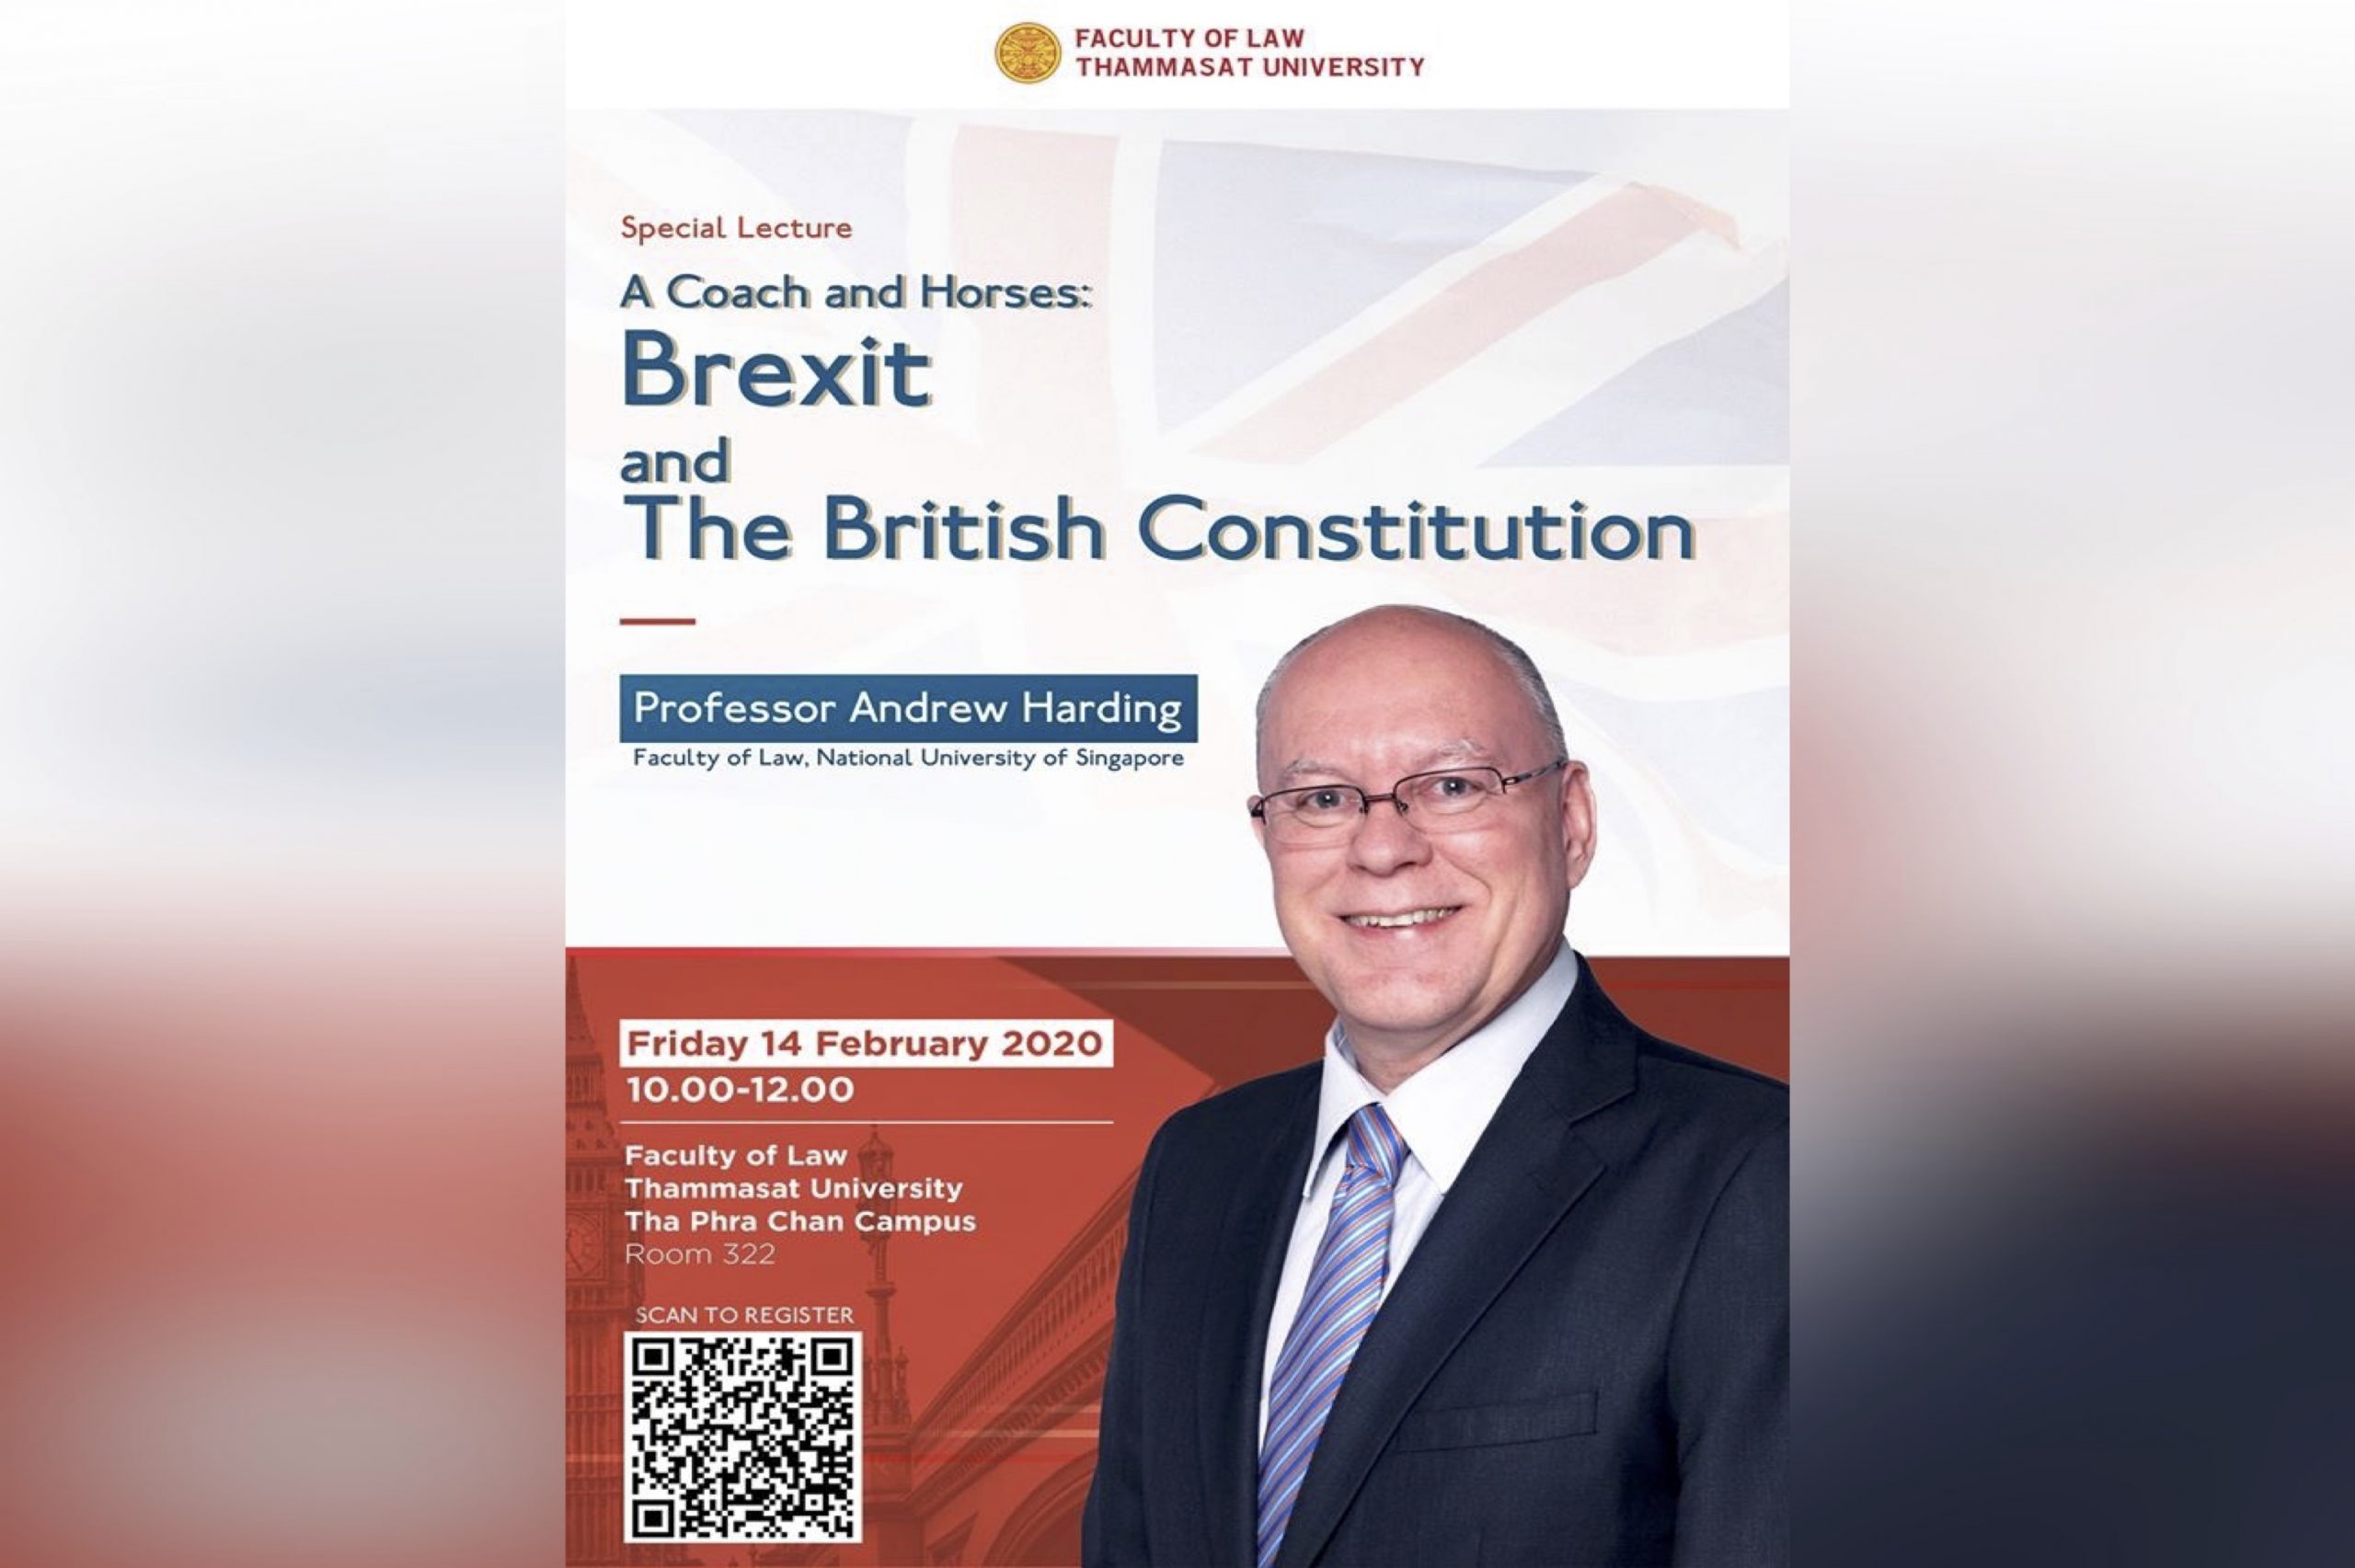 Summary of Special Lecture “A Coach and Horses: Brexit and the British Constitution”